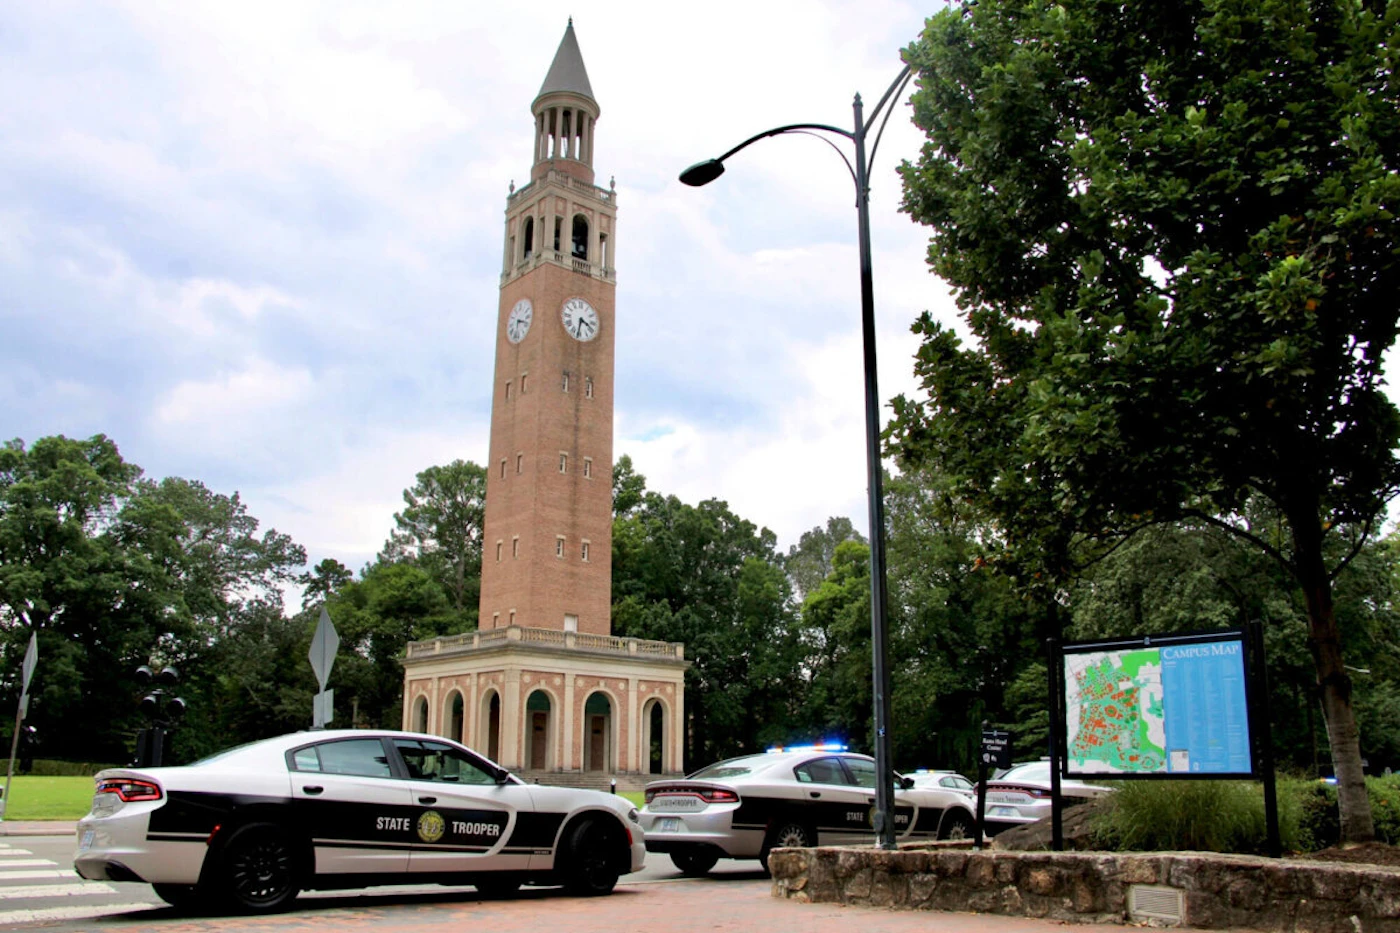 Law enforcement respond to the University of North Carolina at Chapel Hill campus in Chapel Hill, N.C., on Monday, Aug. 28, 2023, after the university locked down and warned of an armed person on campus. (AP Photo/Hannah Schoenbaum)